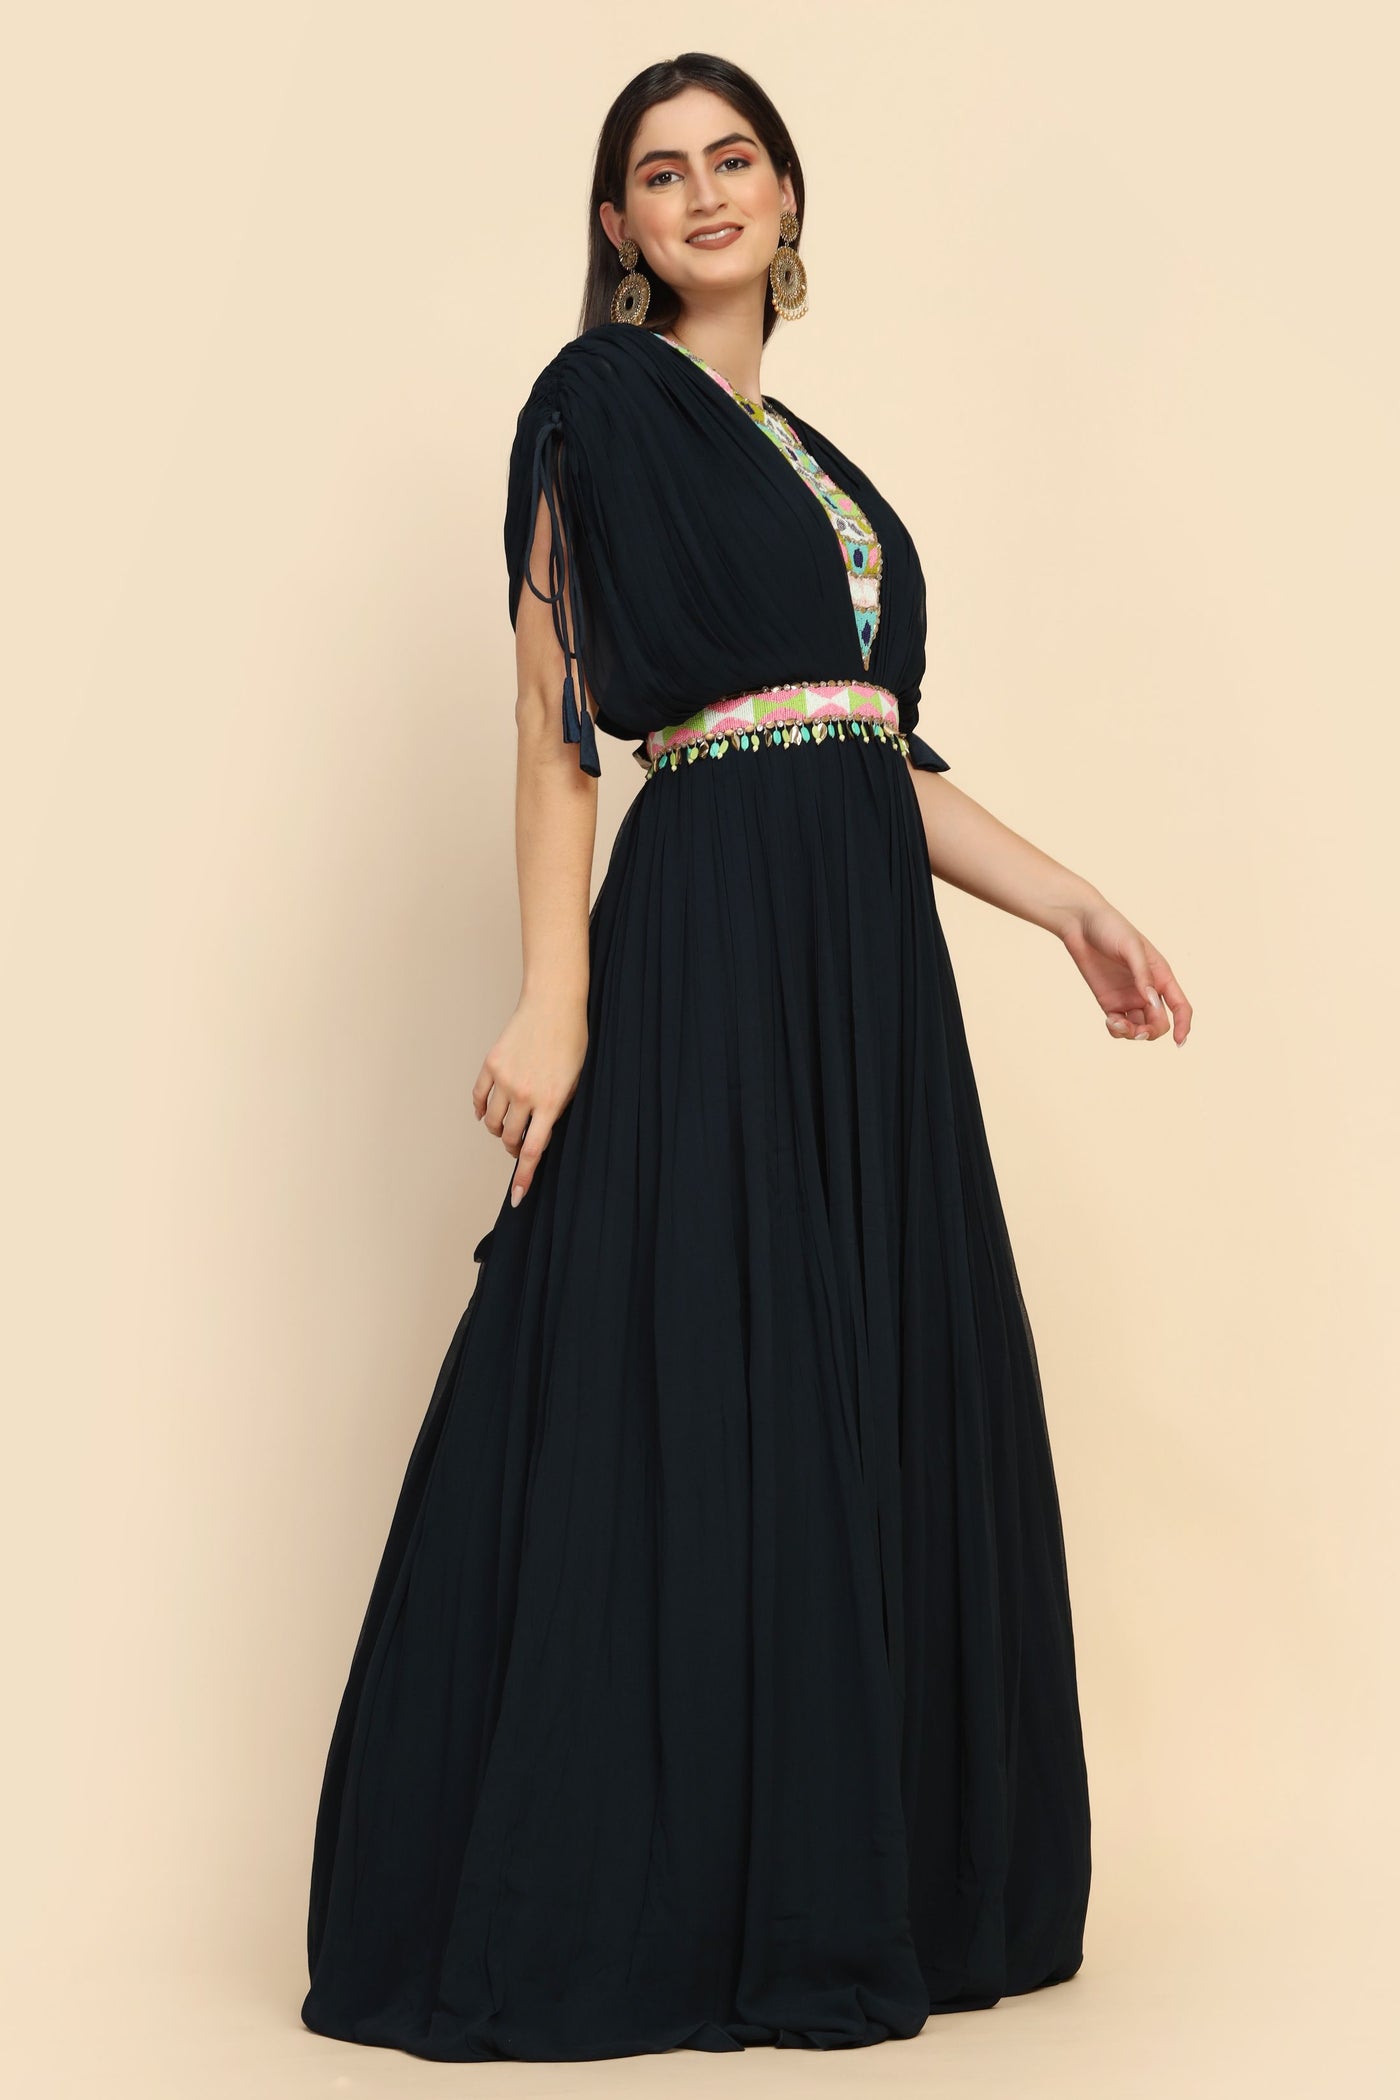 classic black color dress with curtain sleeves